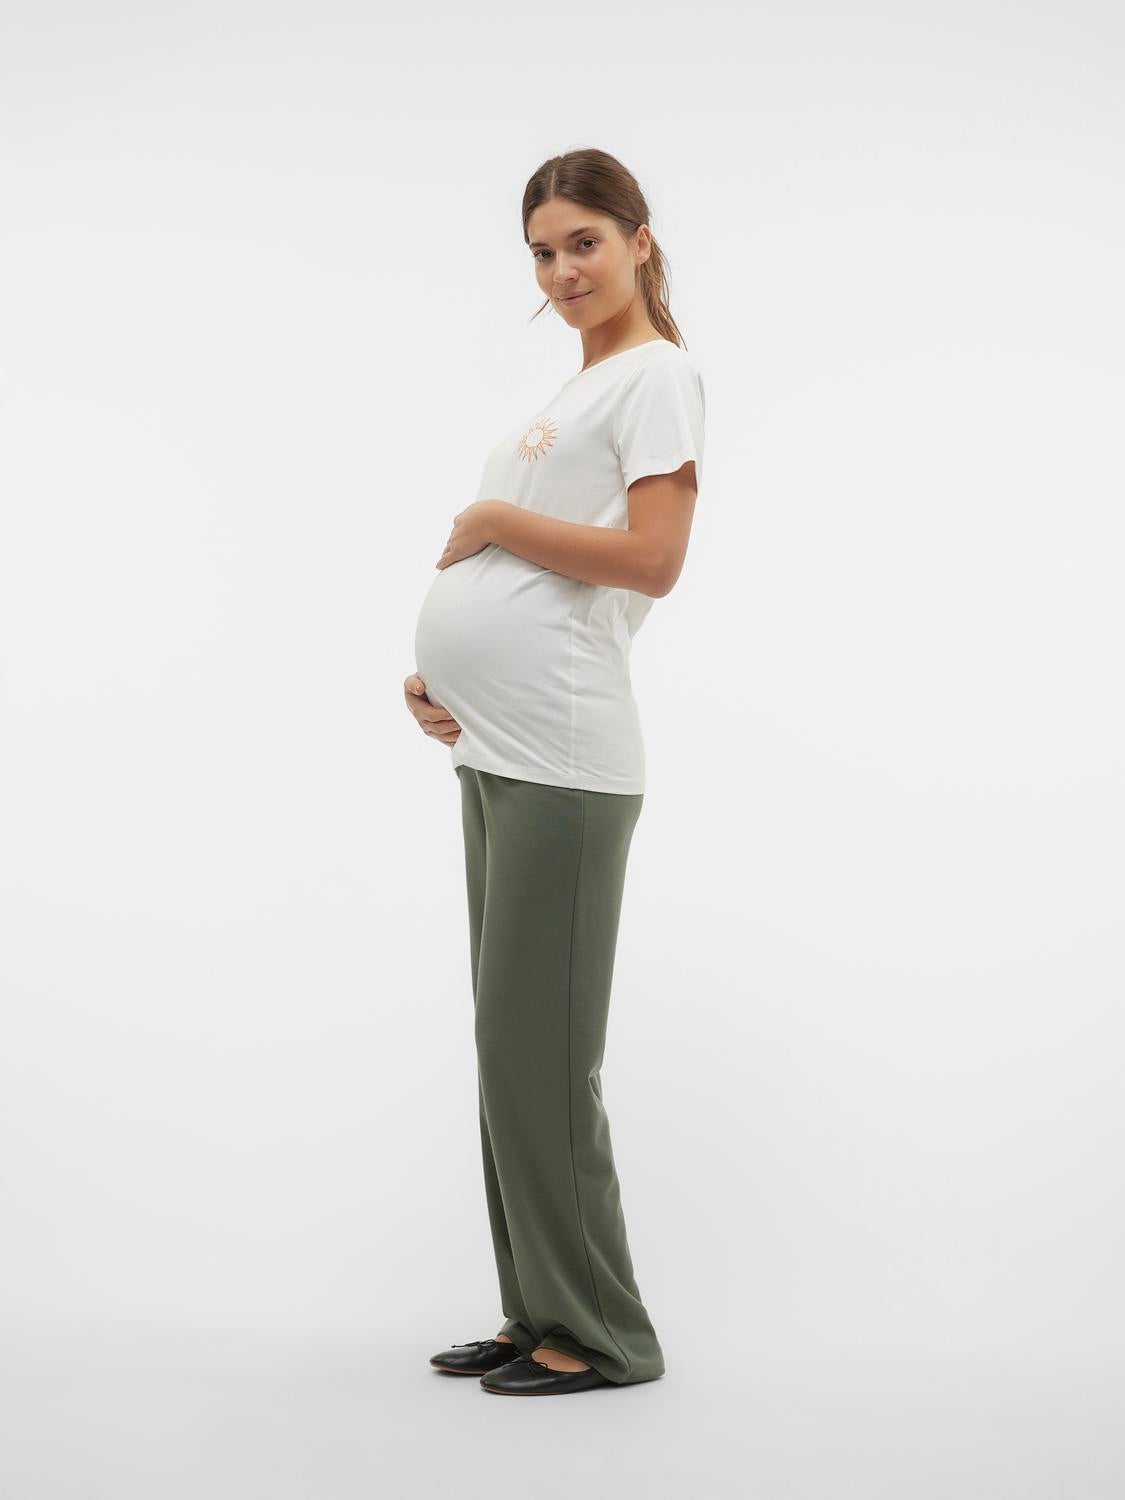 Pregnant Women's Pants Solid Color And Thin Maternity Pregnancy Trousers |  Wish